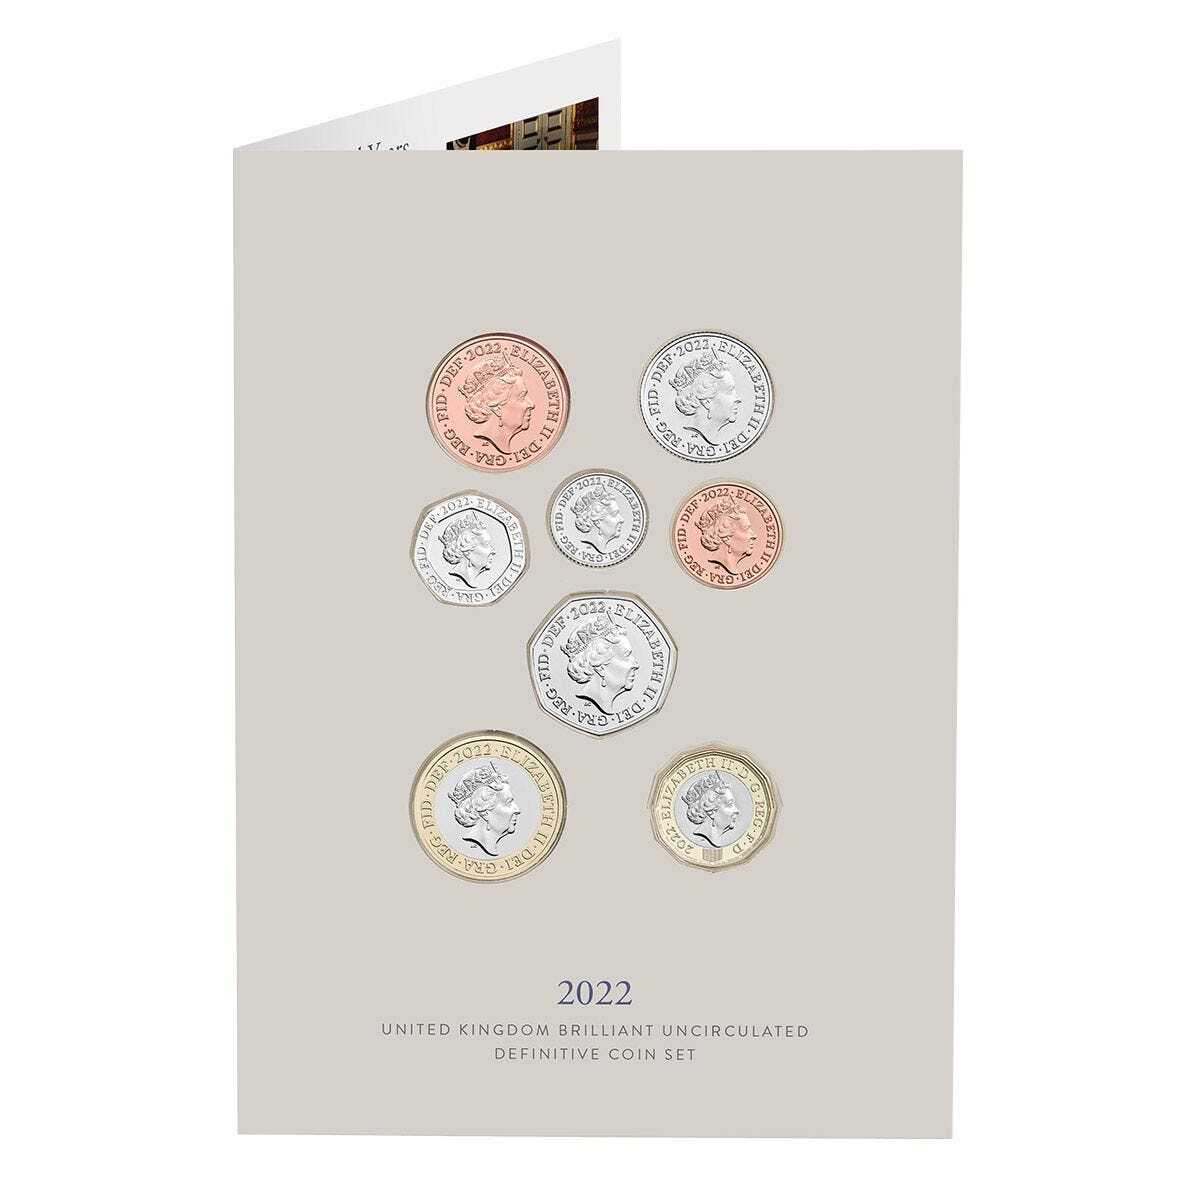 2022 Definitive Brilliant Uncirculated Coin Set (8 Coins)